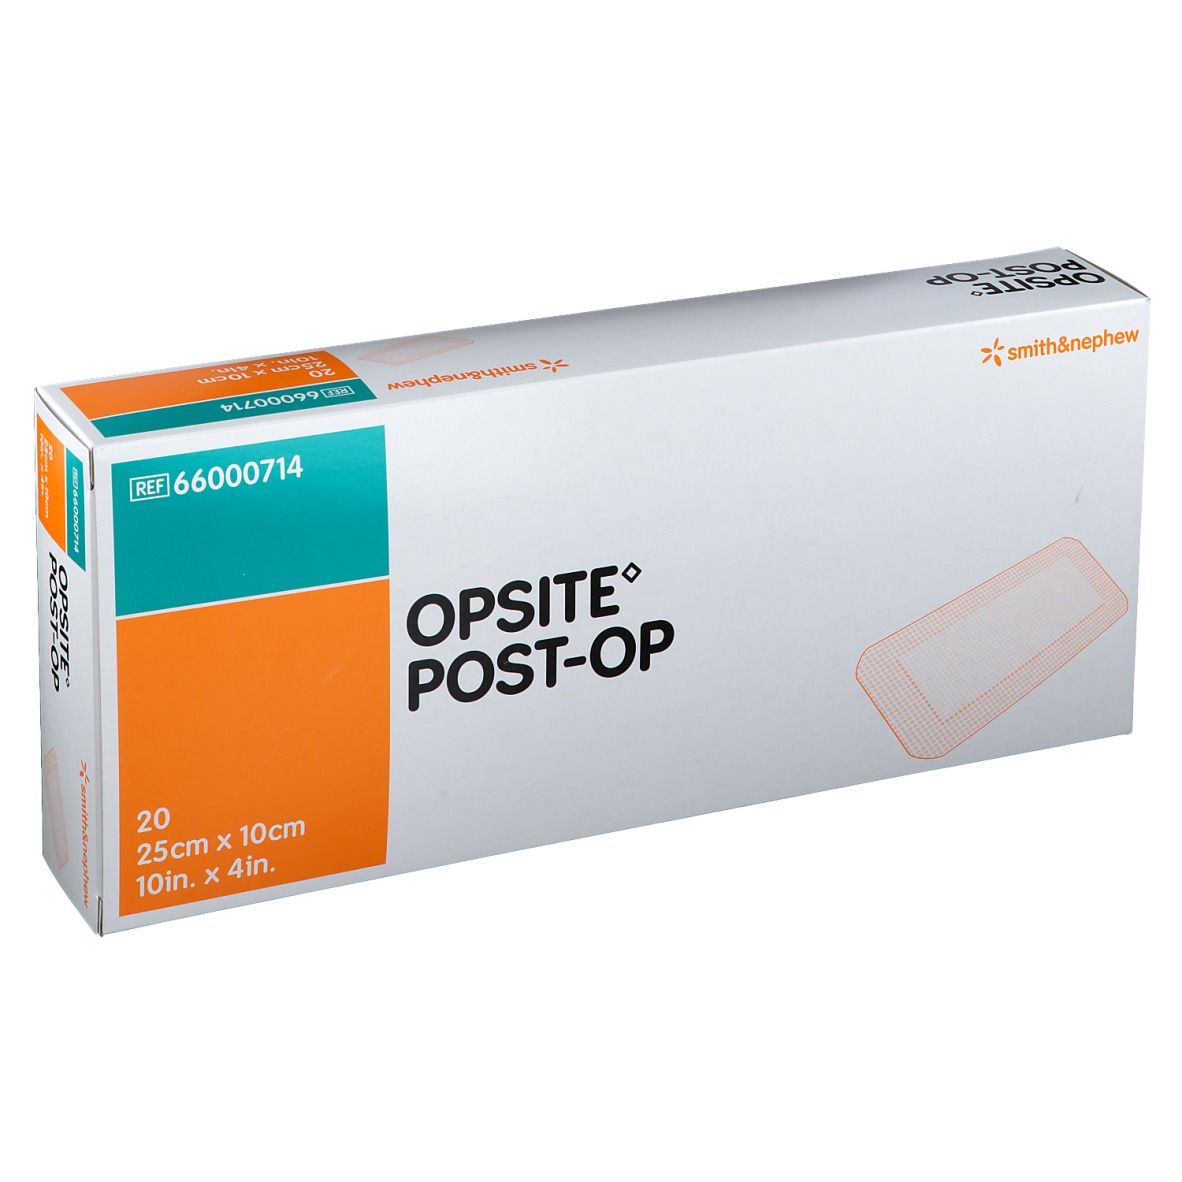 Image of OPSITE® Post Op Folienverband steril 25x10cm